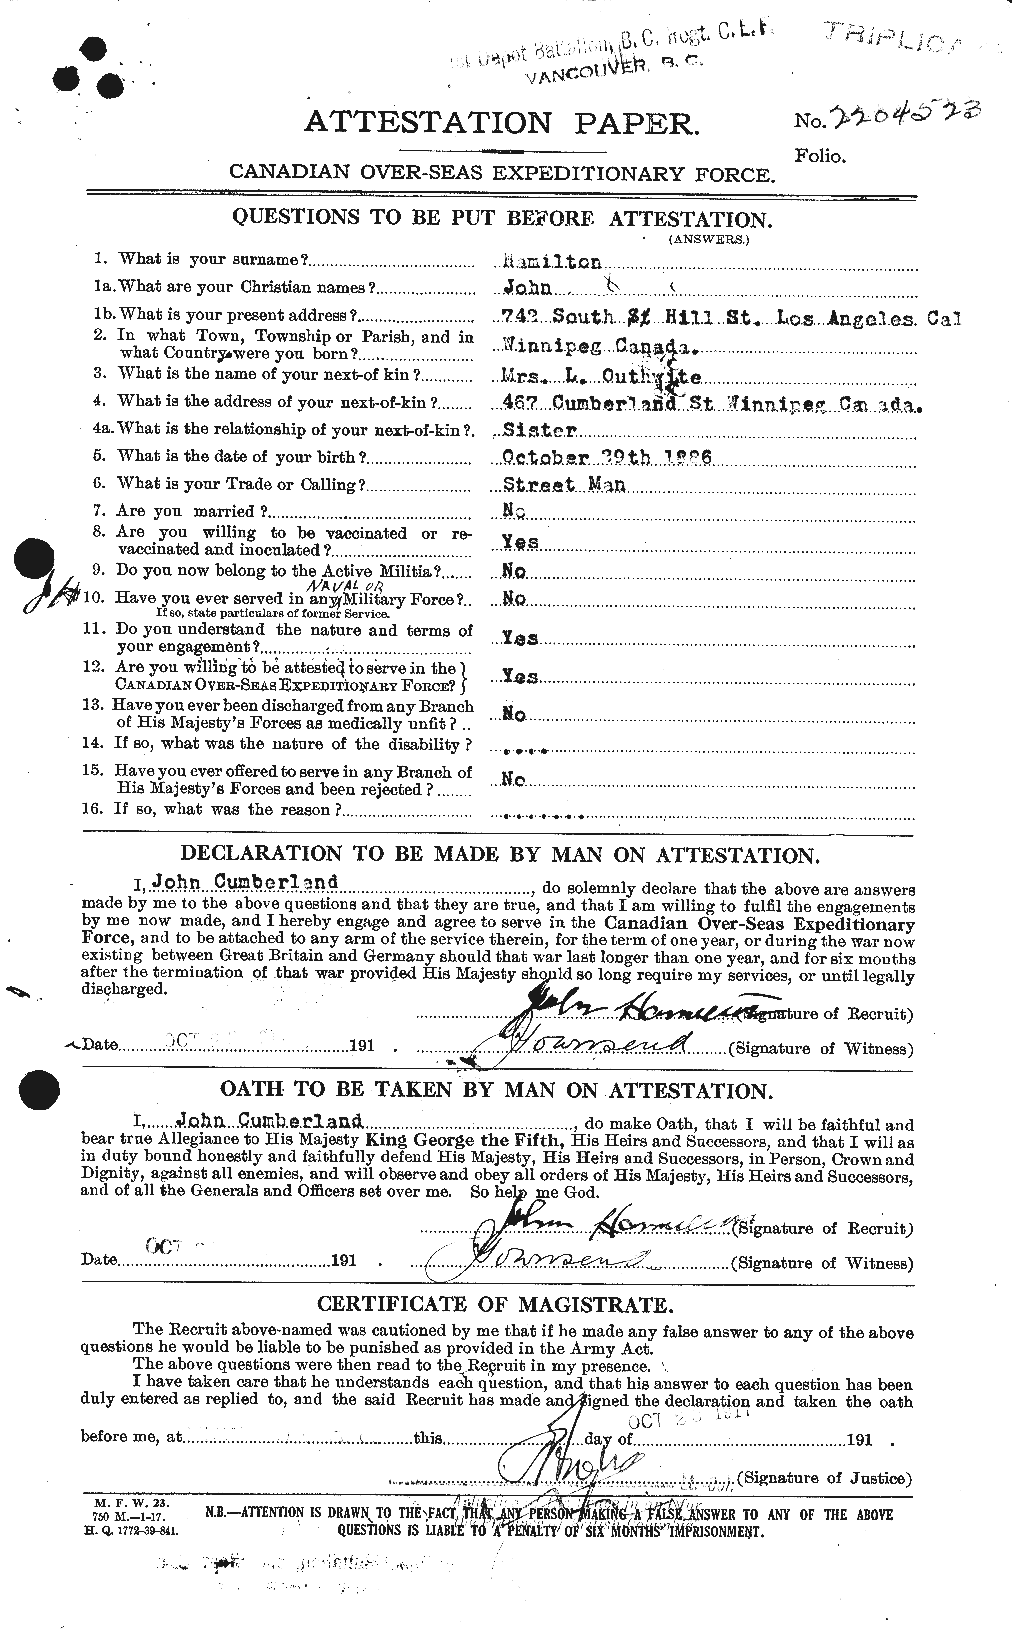 Personnel Records of the First World War - CEF 373034a